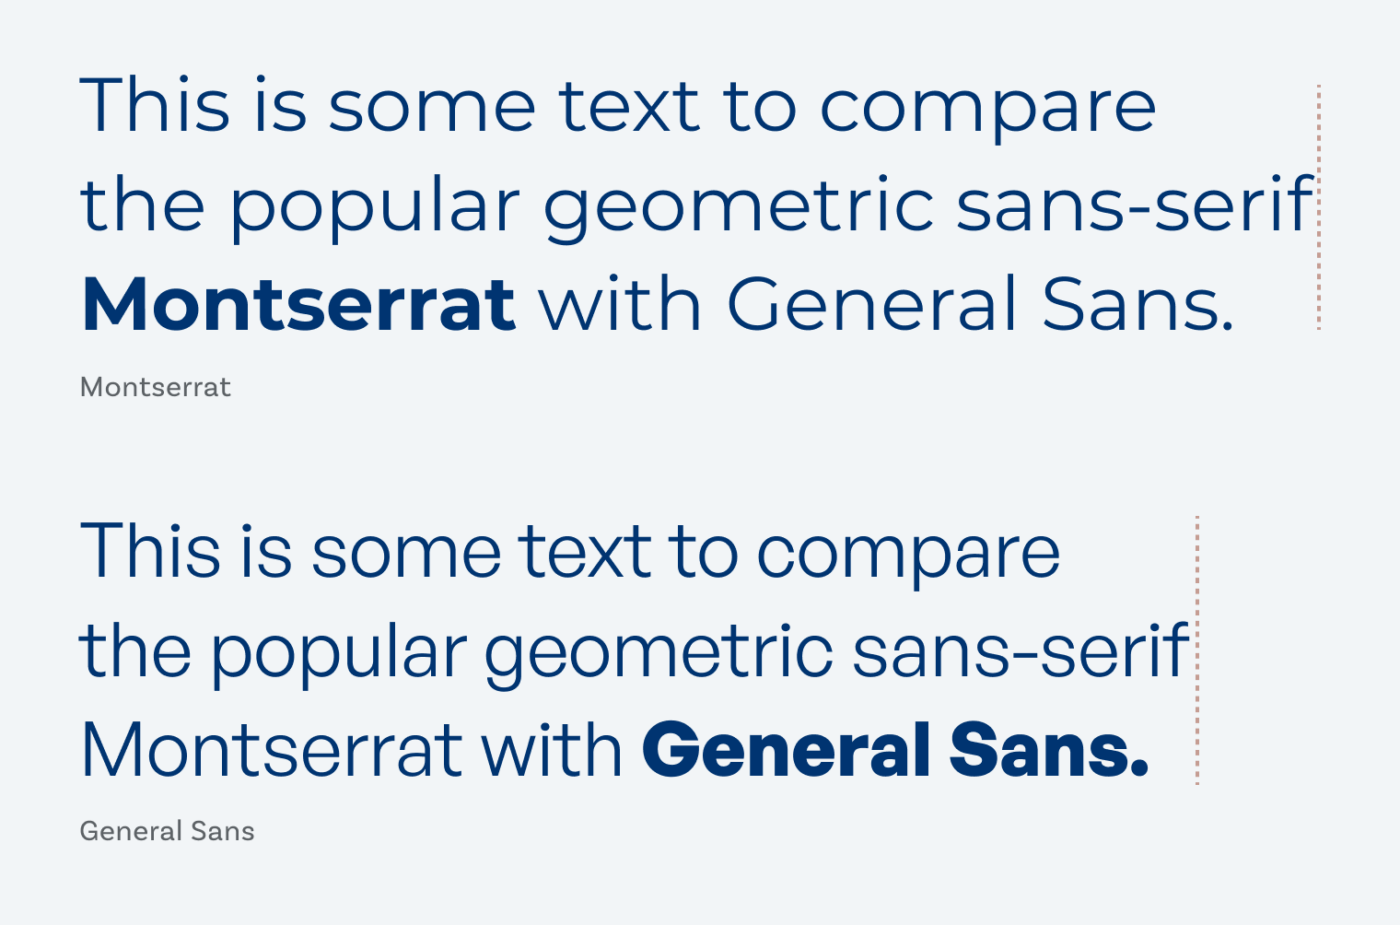 This is some text to compare the popular geometric sans-serif Montserrat with General Sans. This is some text to compare the popular geometric sans-serif Montserrat with General Sans.